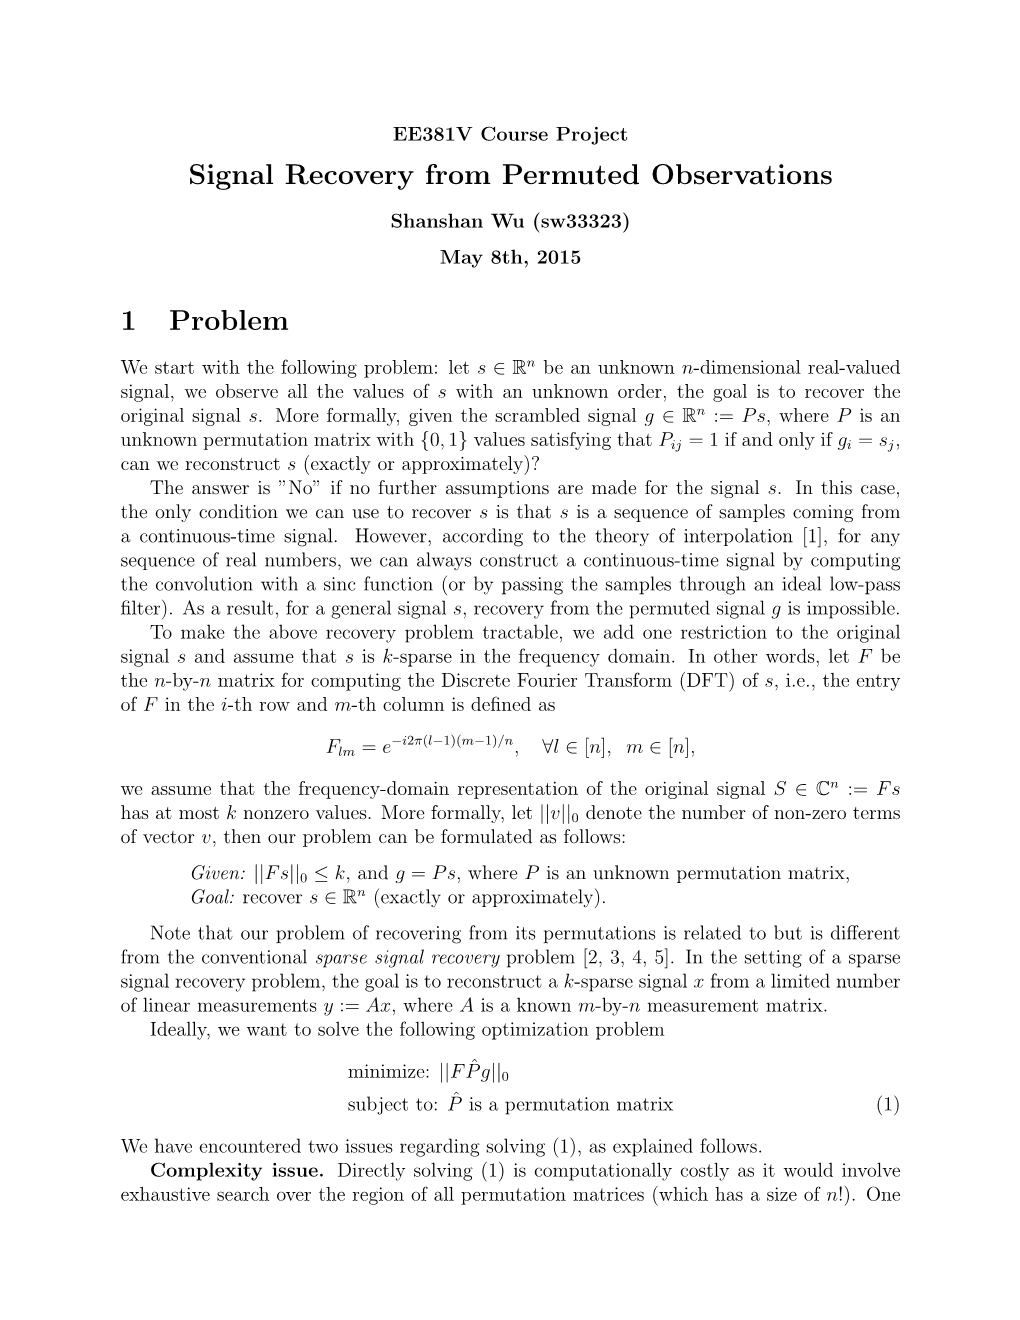 Signal Recovery from Permuted Observations